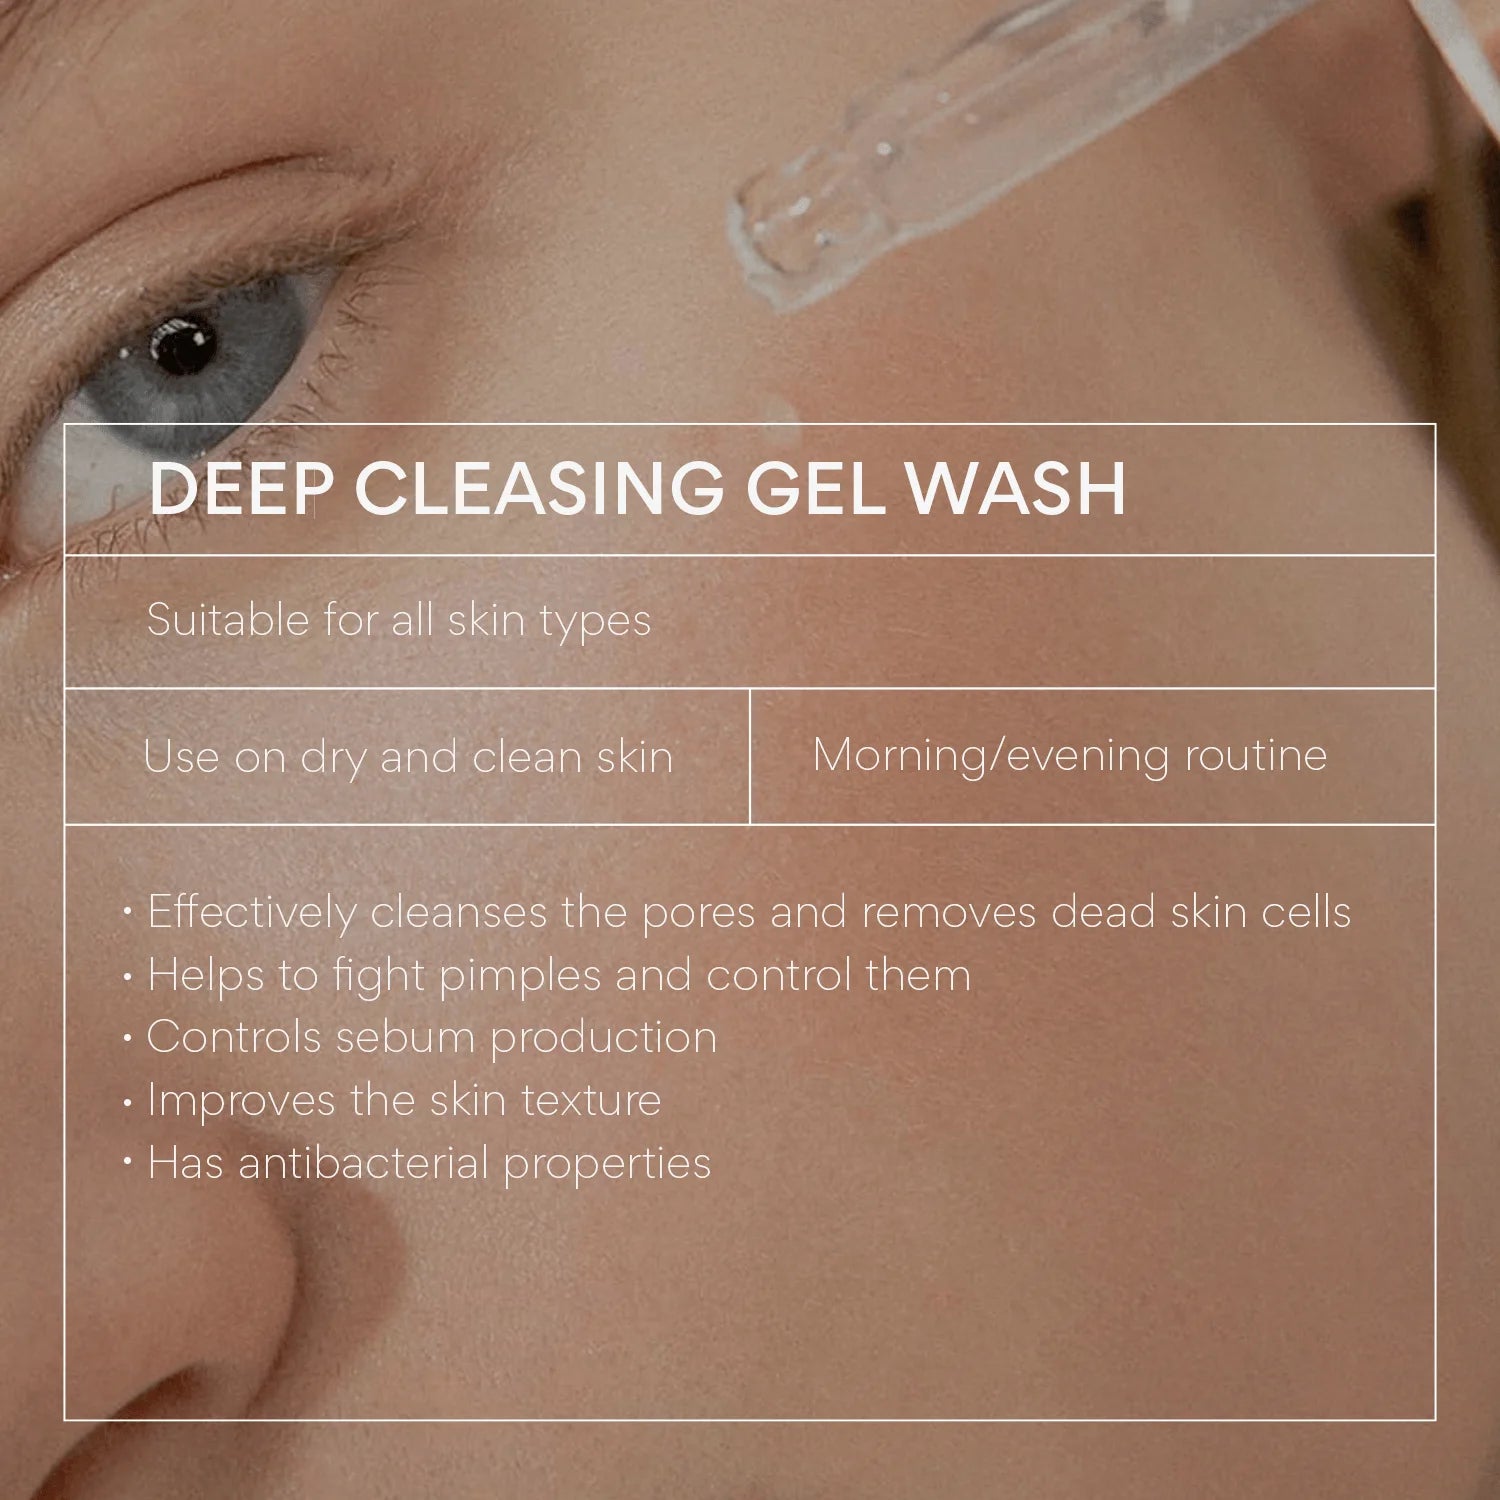 DEEP CLEANSING GEL WASH to fight acne and blemishes